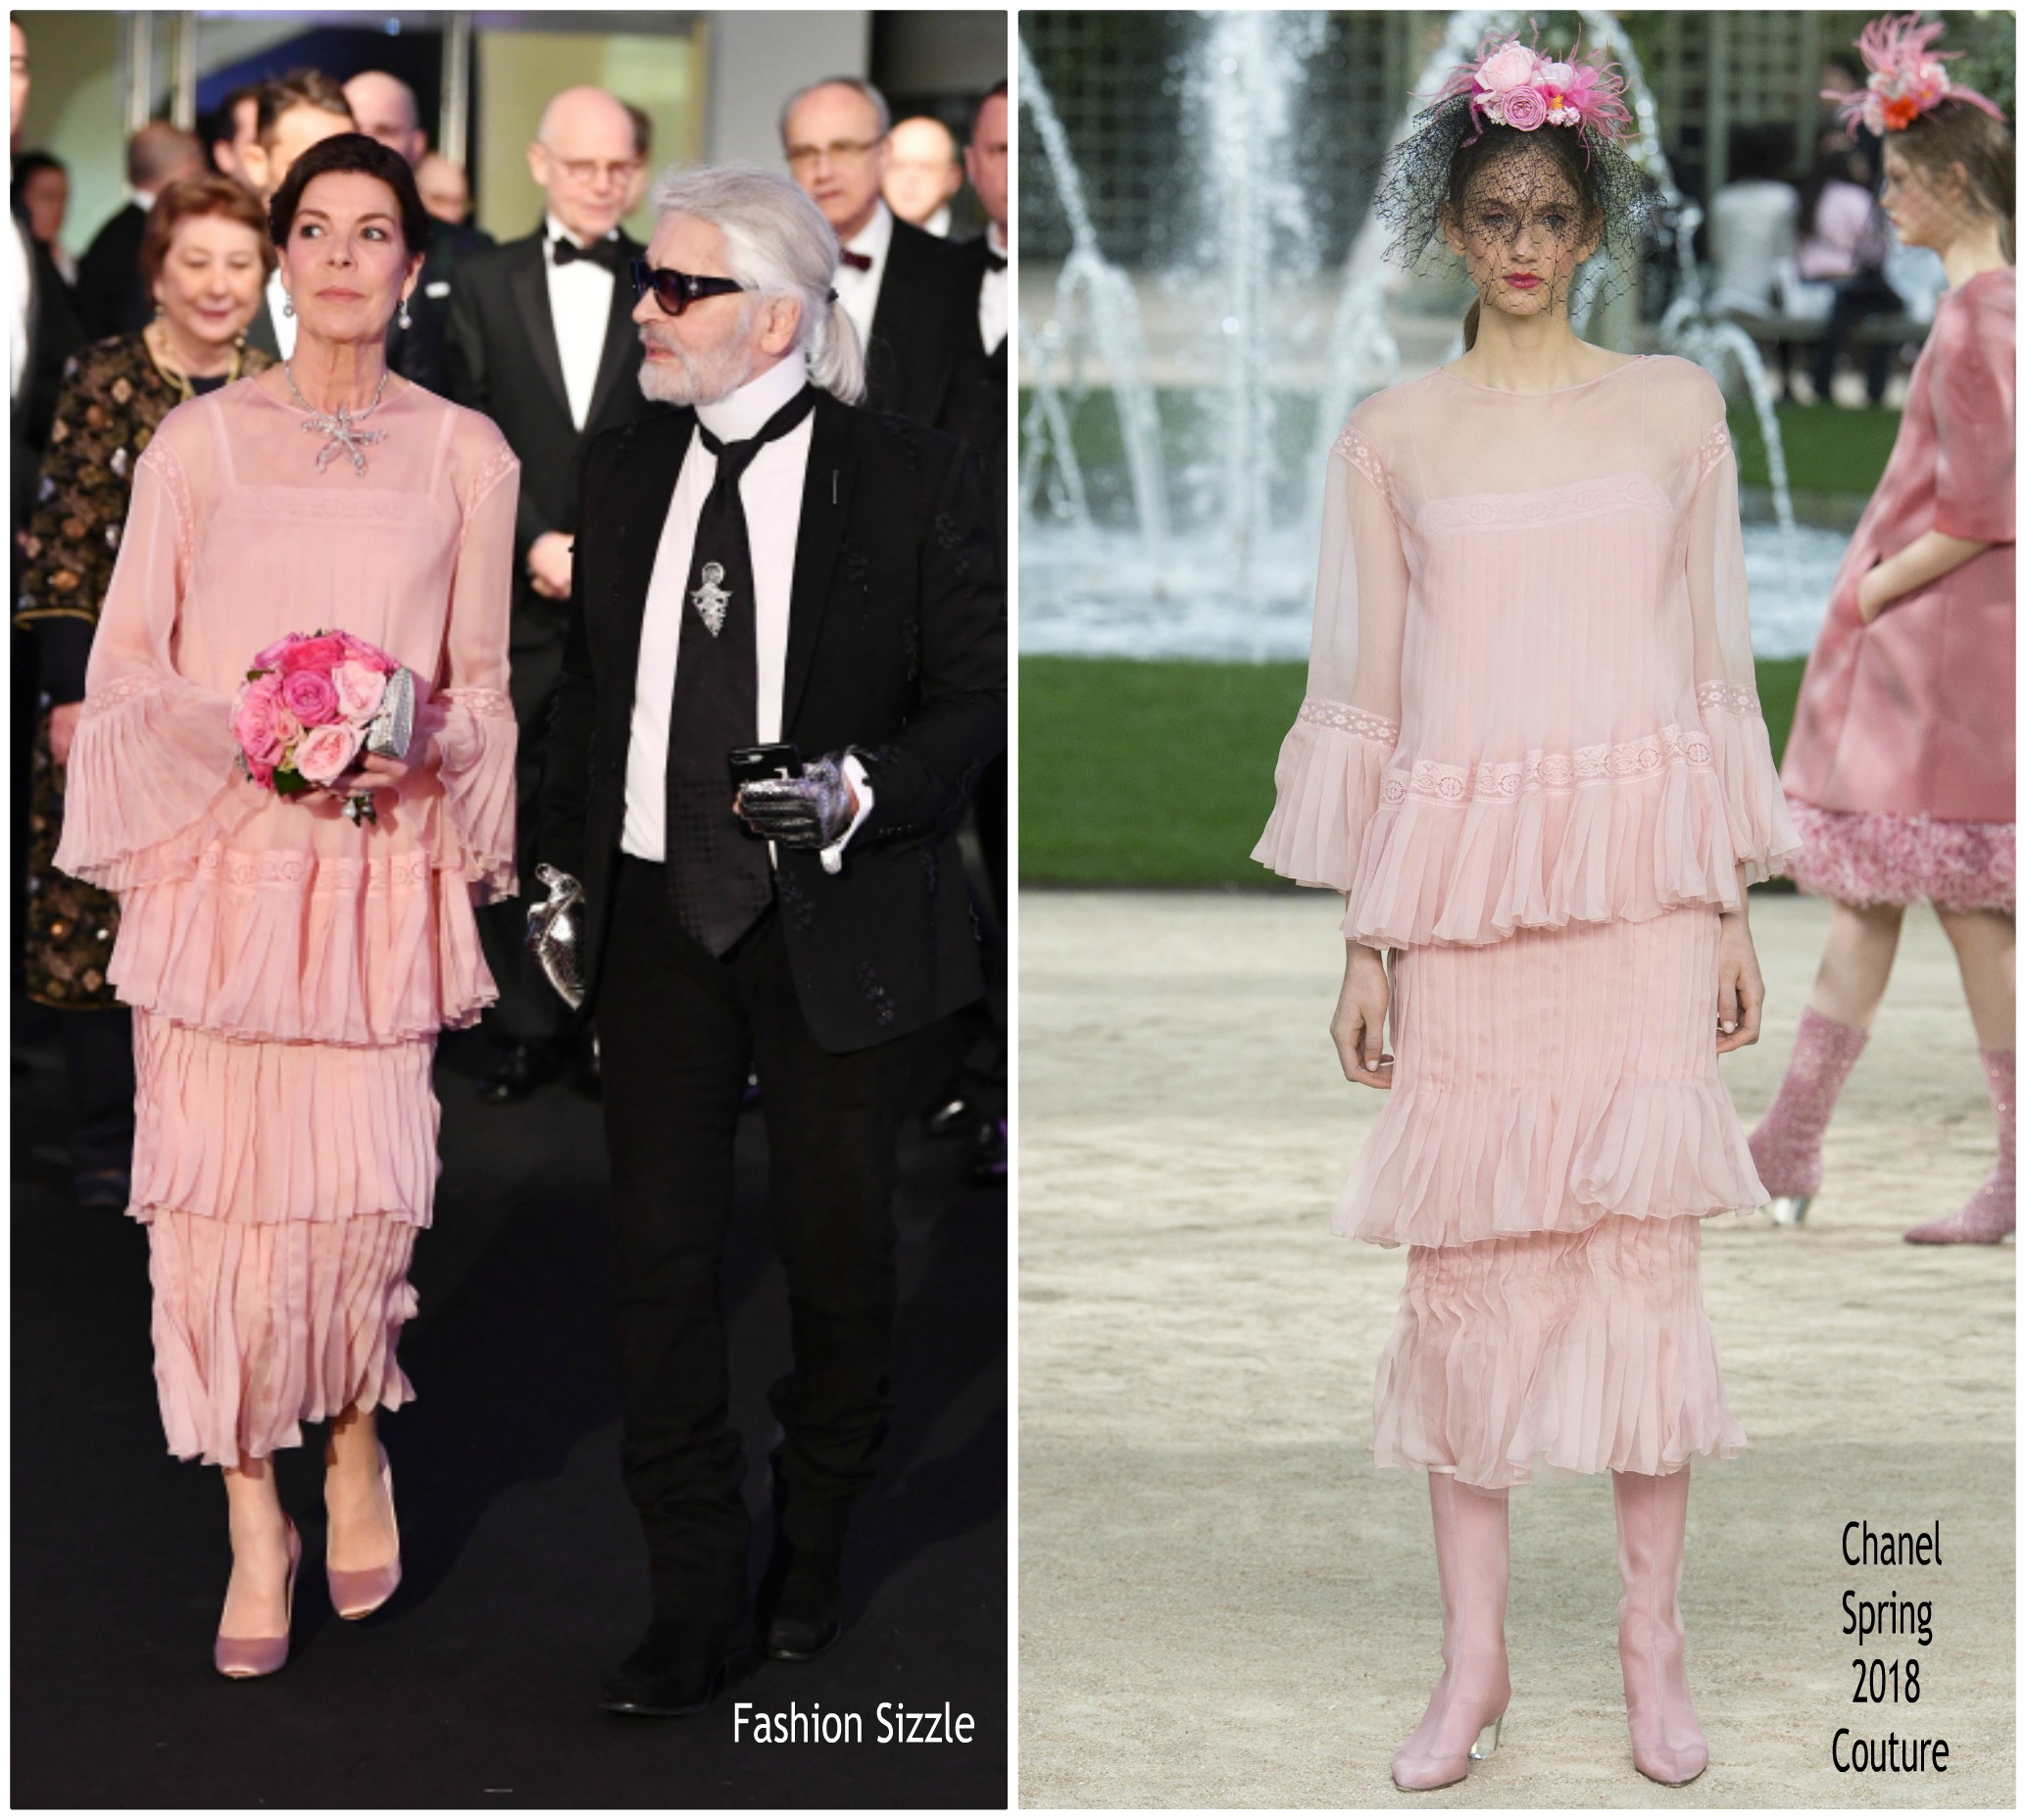 princess-caroline-of-hanover-in-chanel-couture-2018-rose-ball